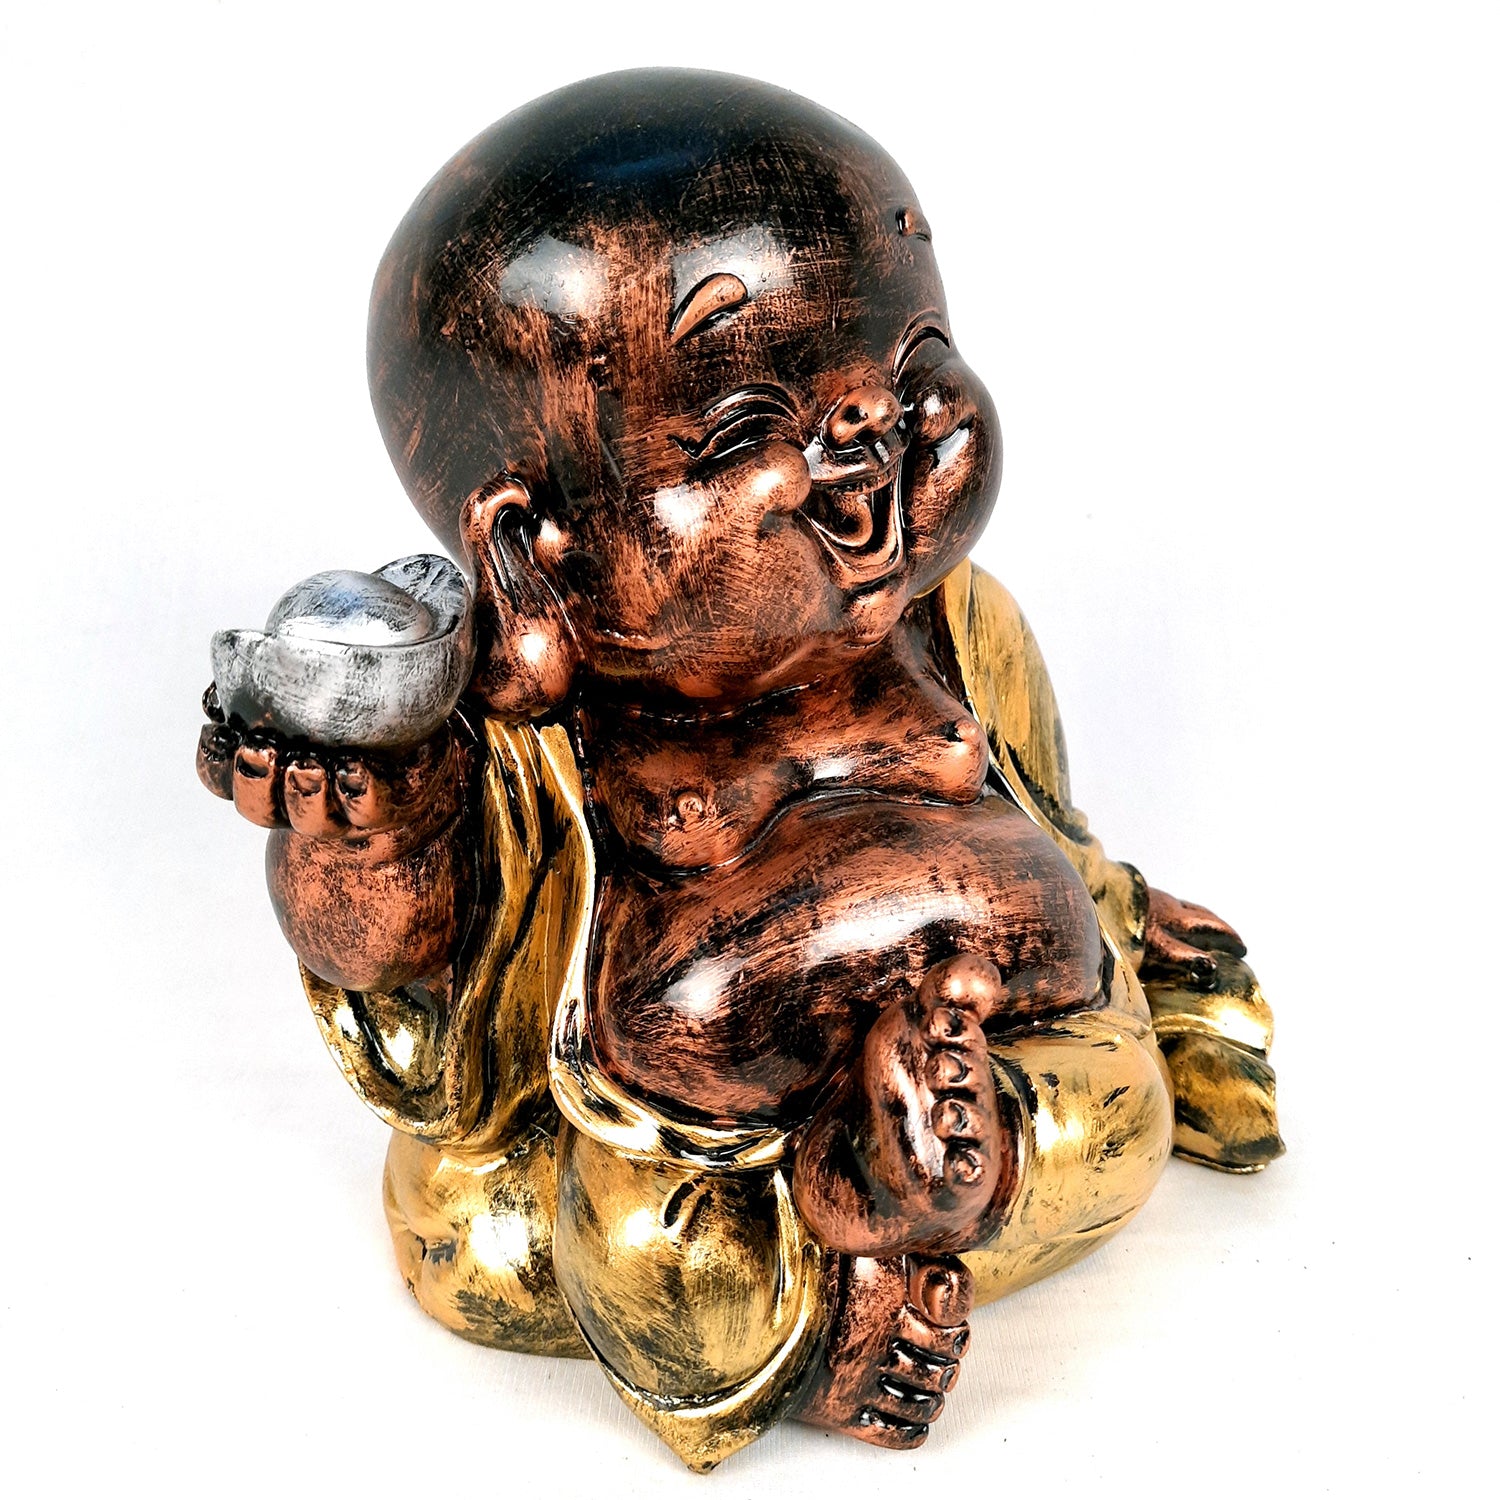 Laughing Buddha Showpiece For Good Luck | Baby Monk Statue - for Money, Happiness, Positivity, Home Decor & Gift - 8 Inch - apkamart